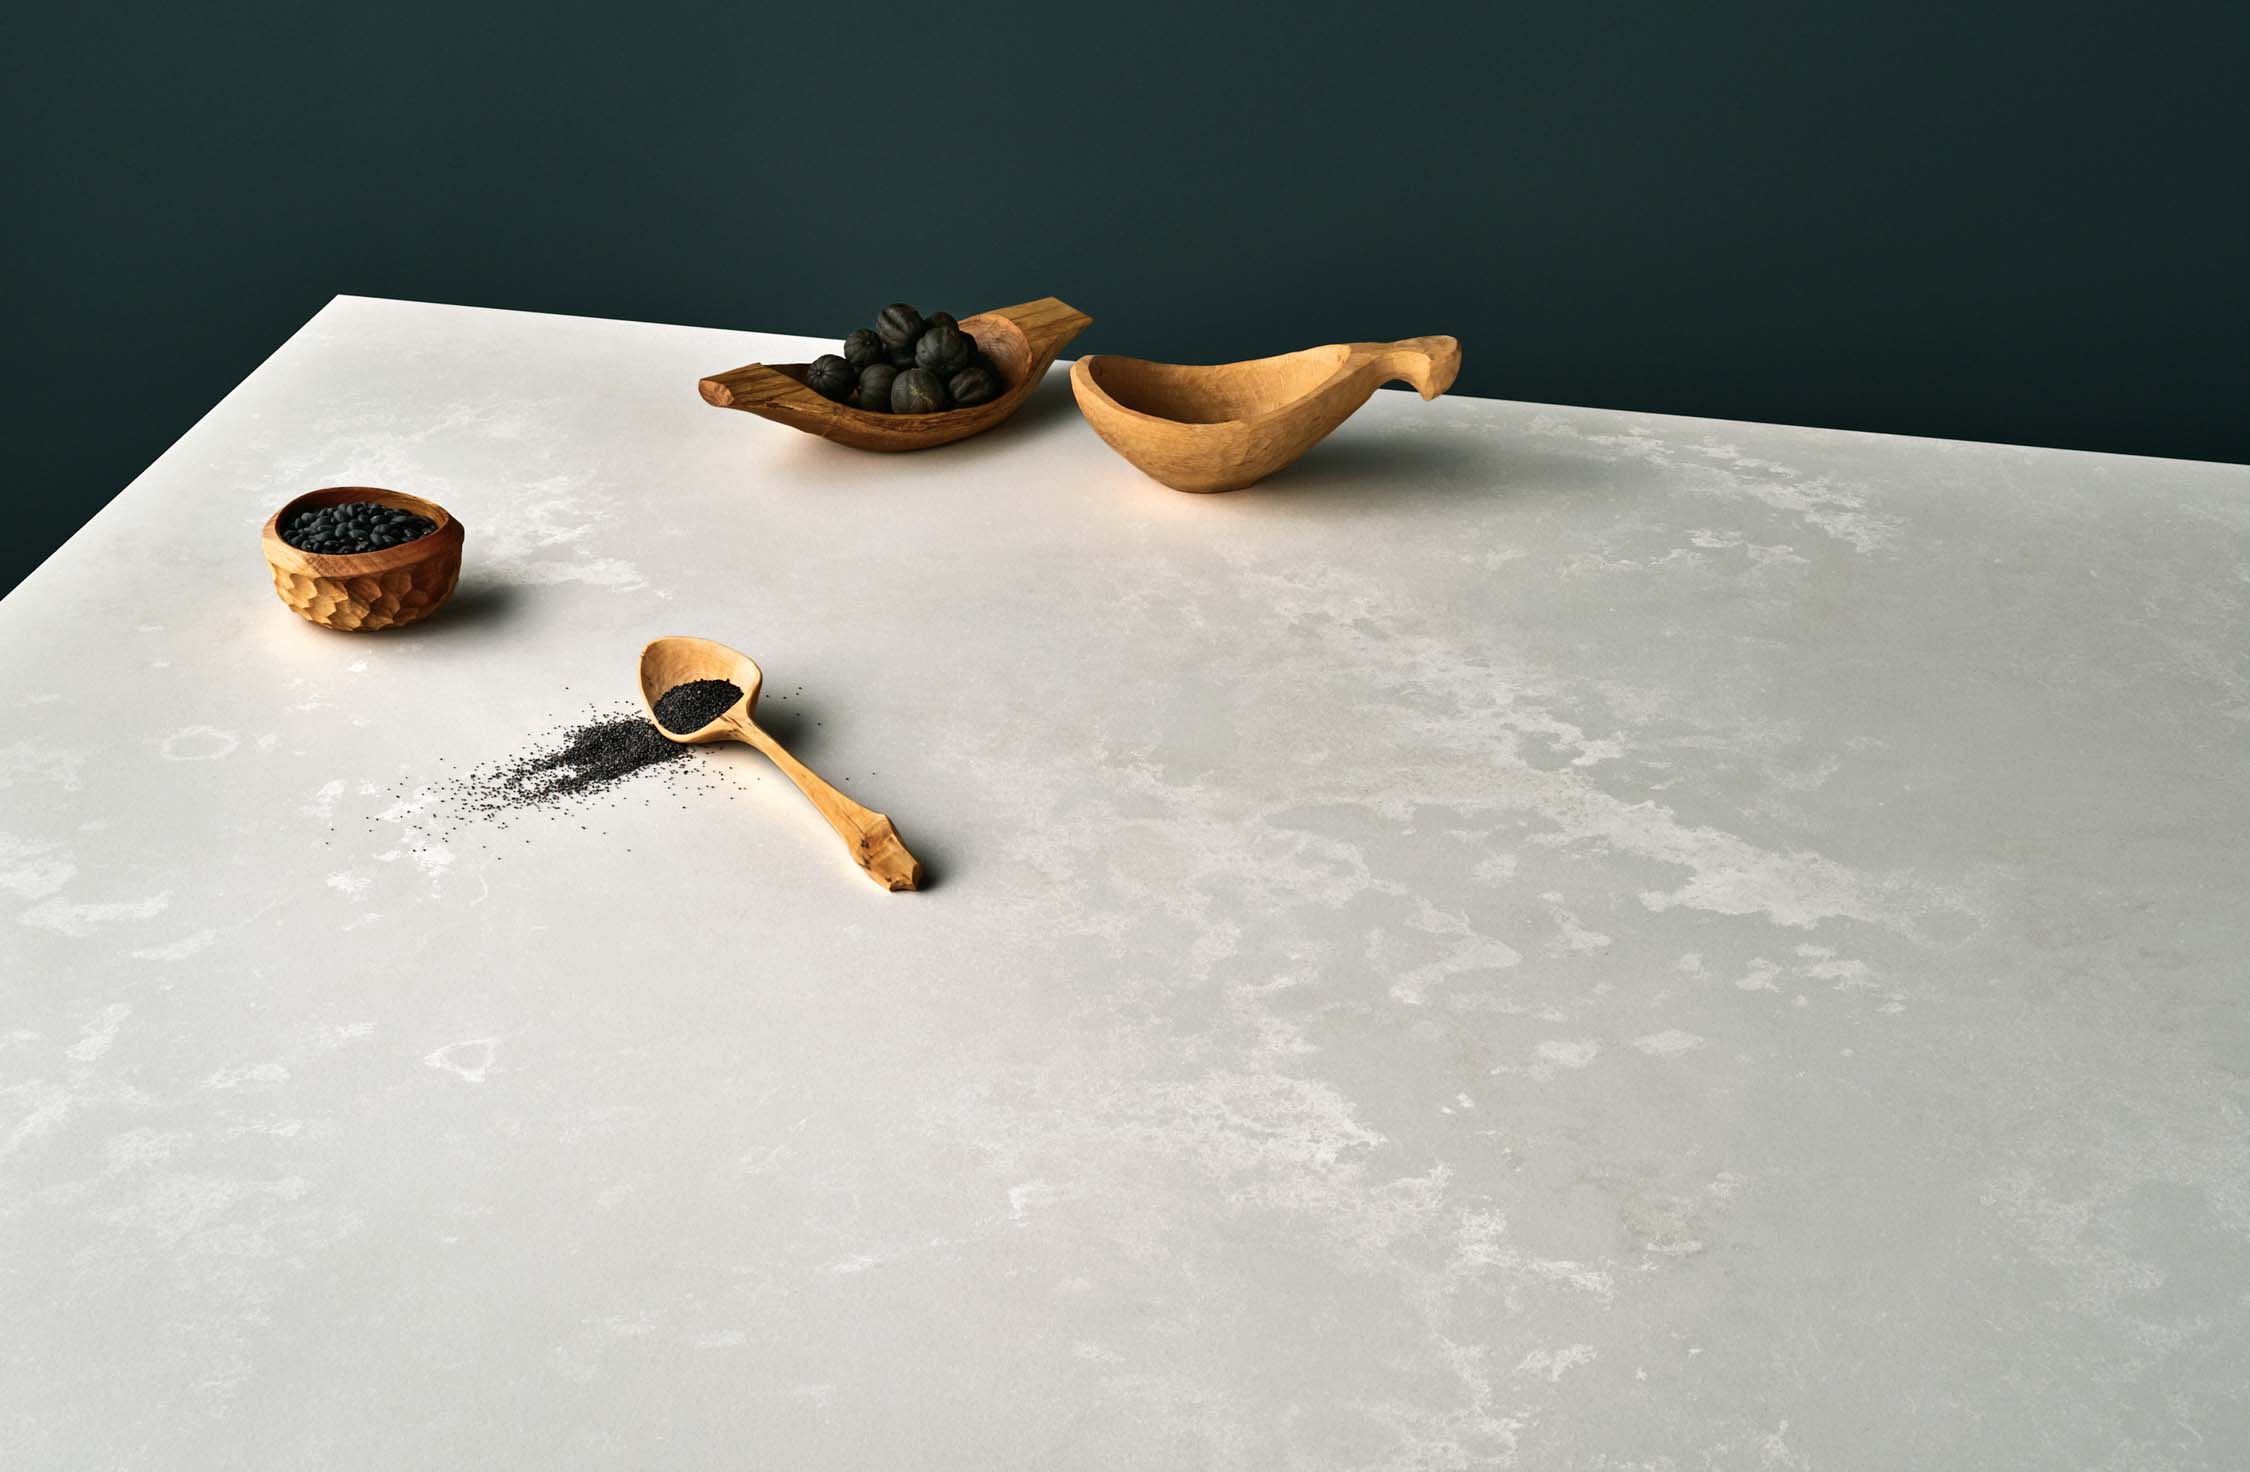 Sourcing your own stone worktop